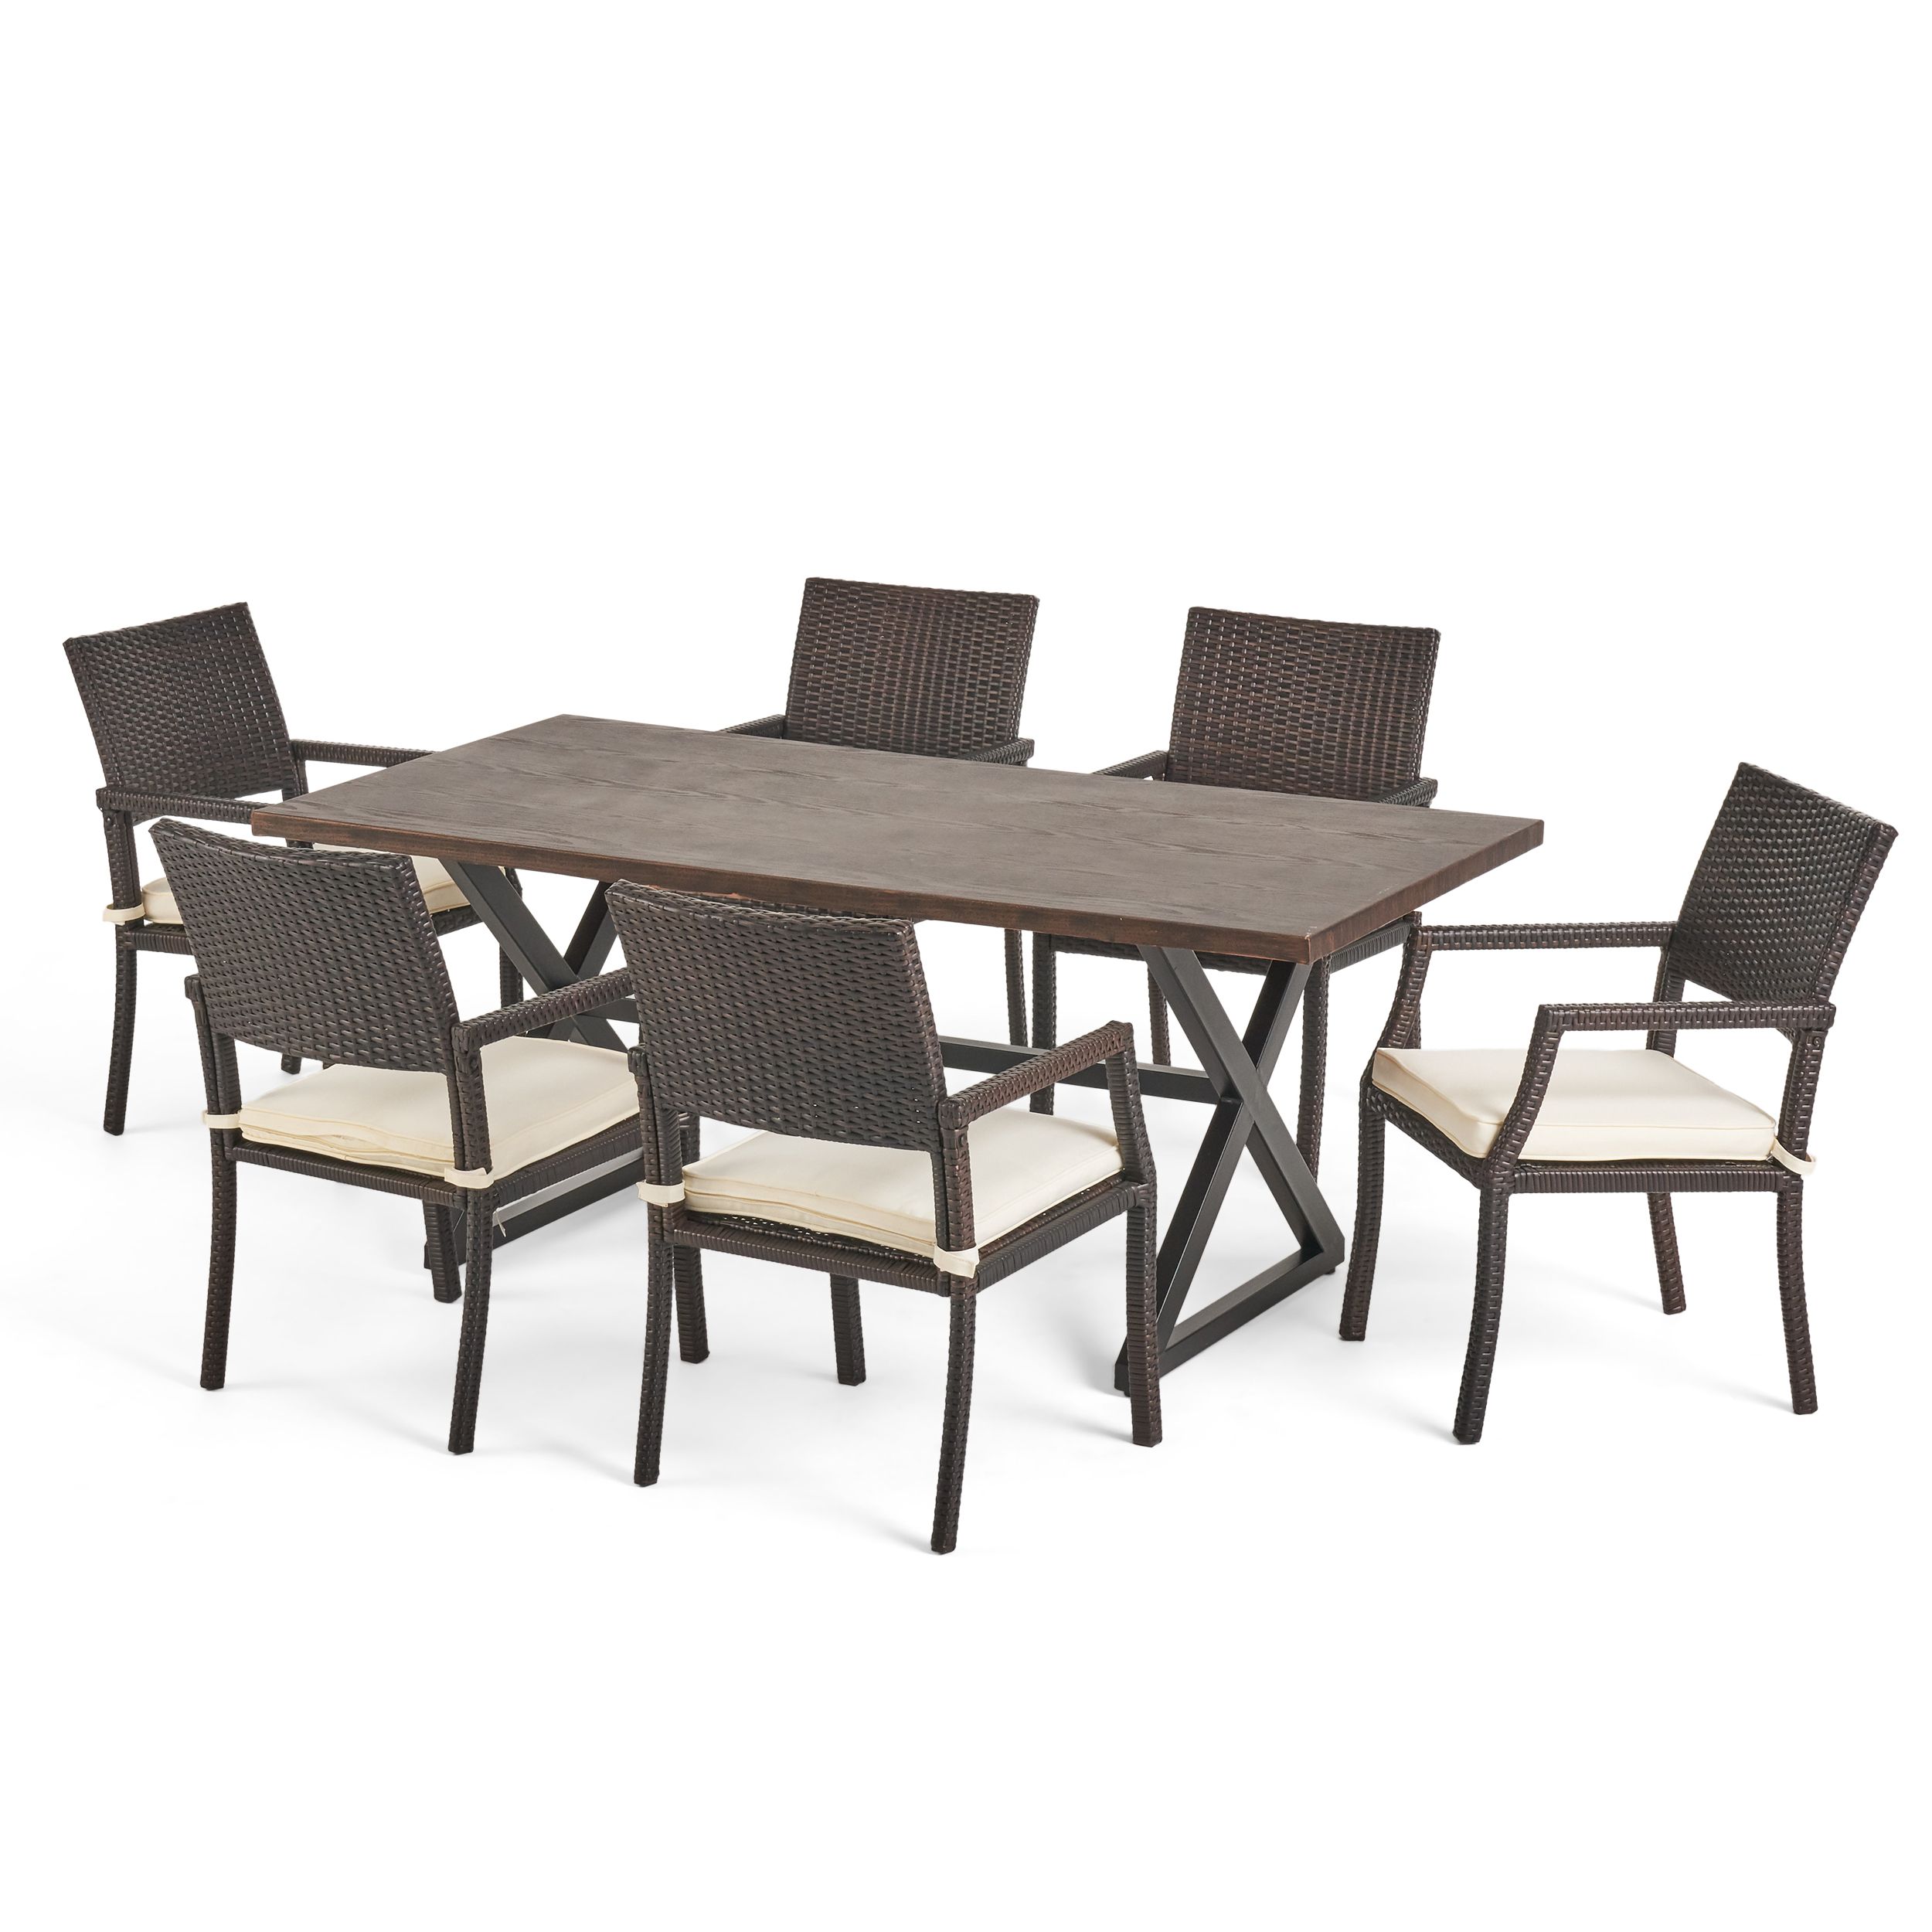 Outdoor 7 Piece Aluminum Dining Set With Wicker Dining Chairs And Regarding Fashionable White Outdoor Patio Dining Sets (View 15 of 15)